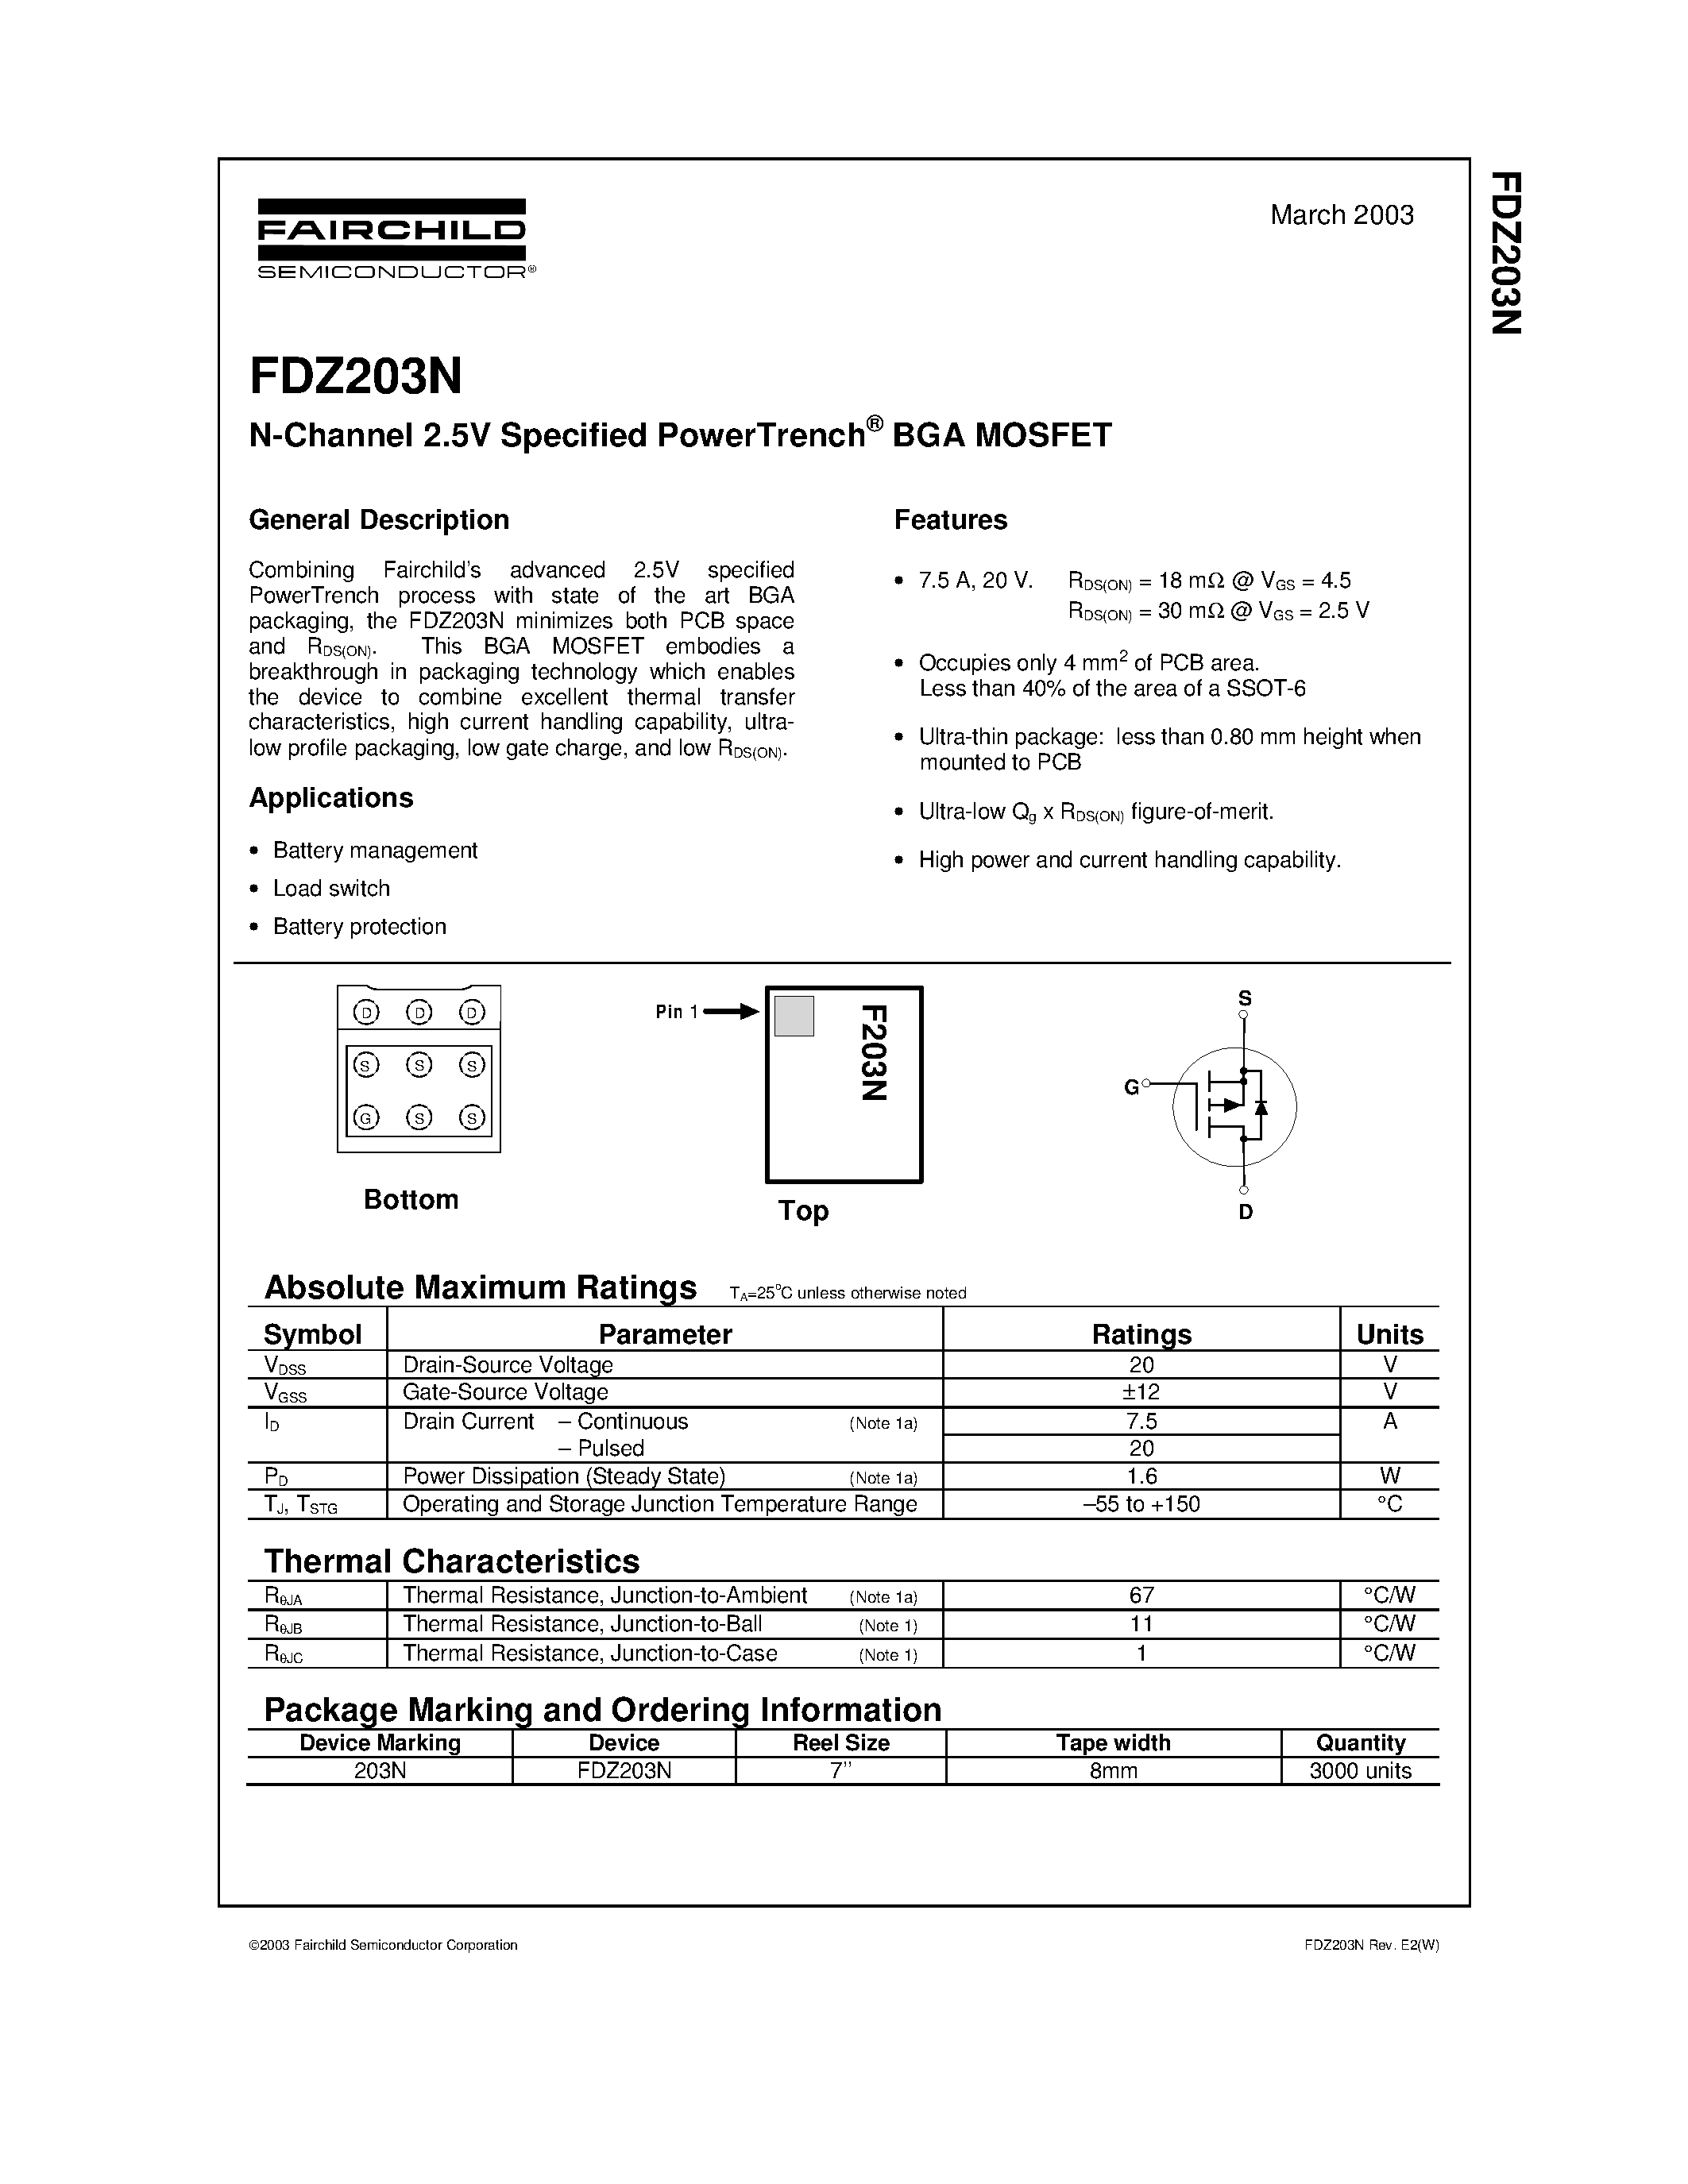 Даташит FDZ203N - N-Channel 2.5V Specified PowerTrench BGA MOSFET страница 1